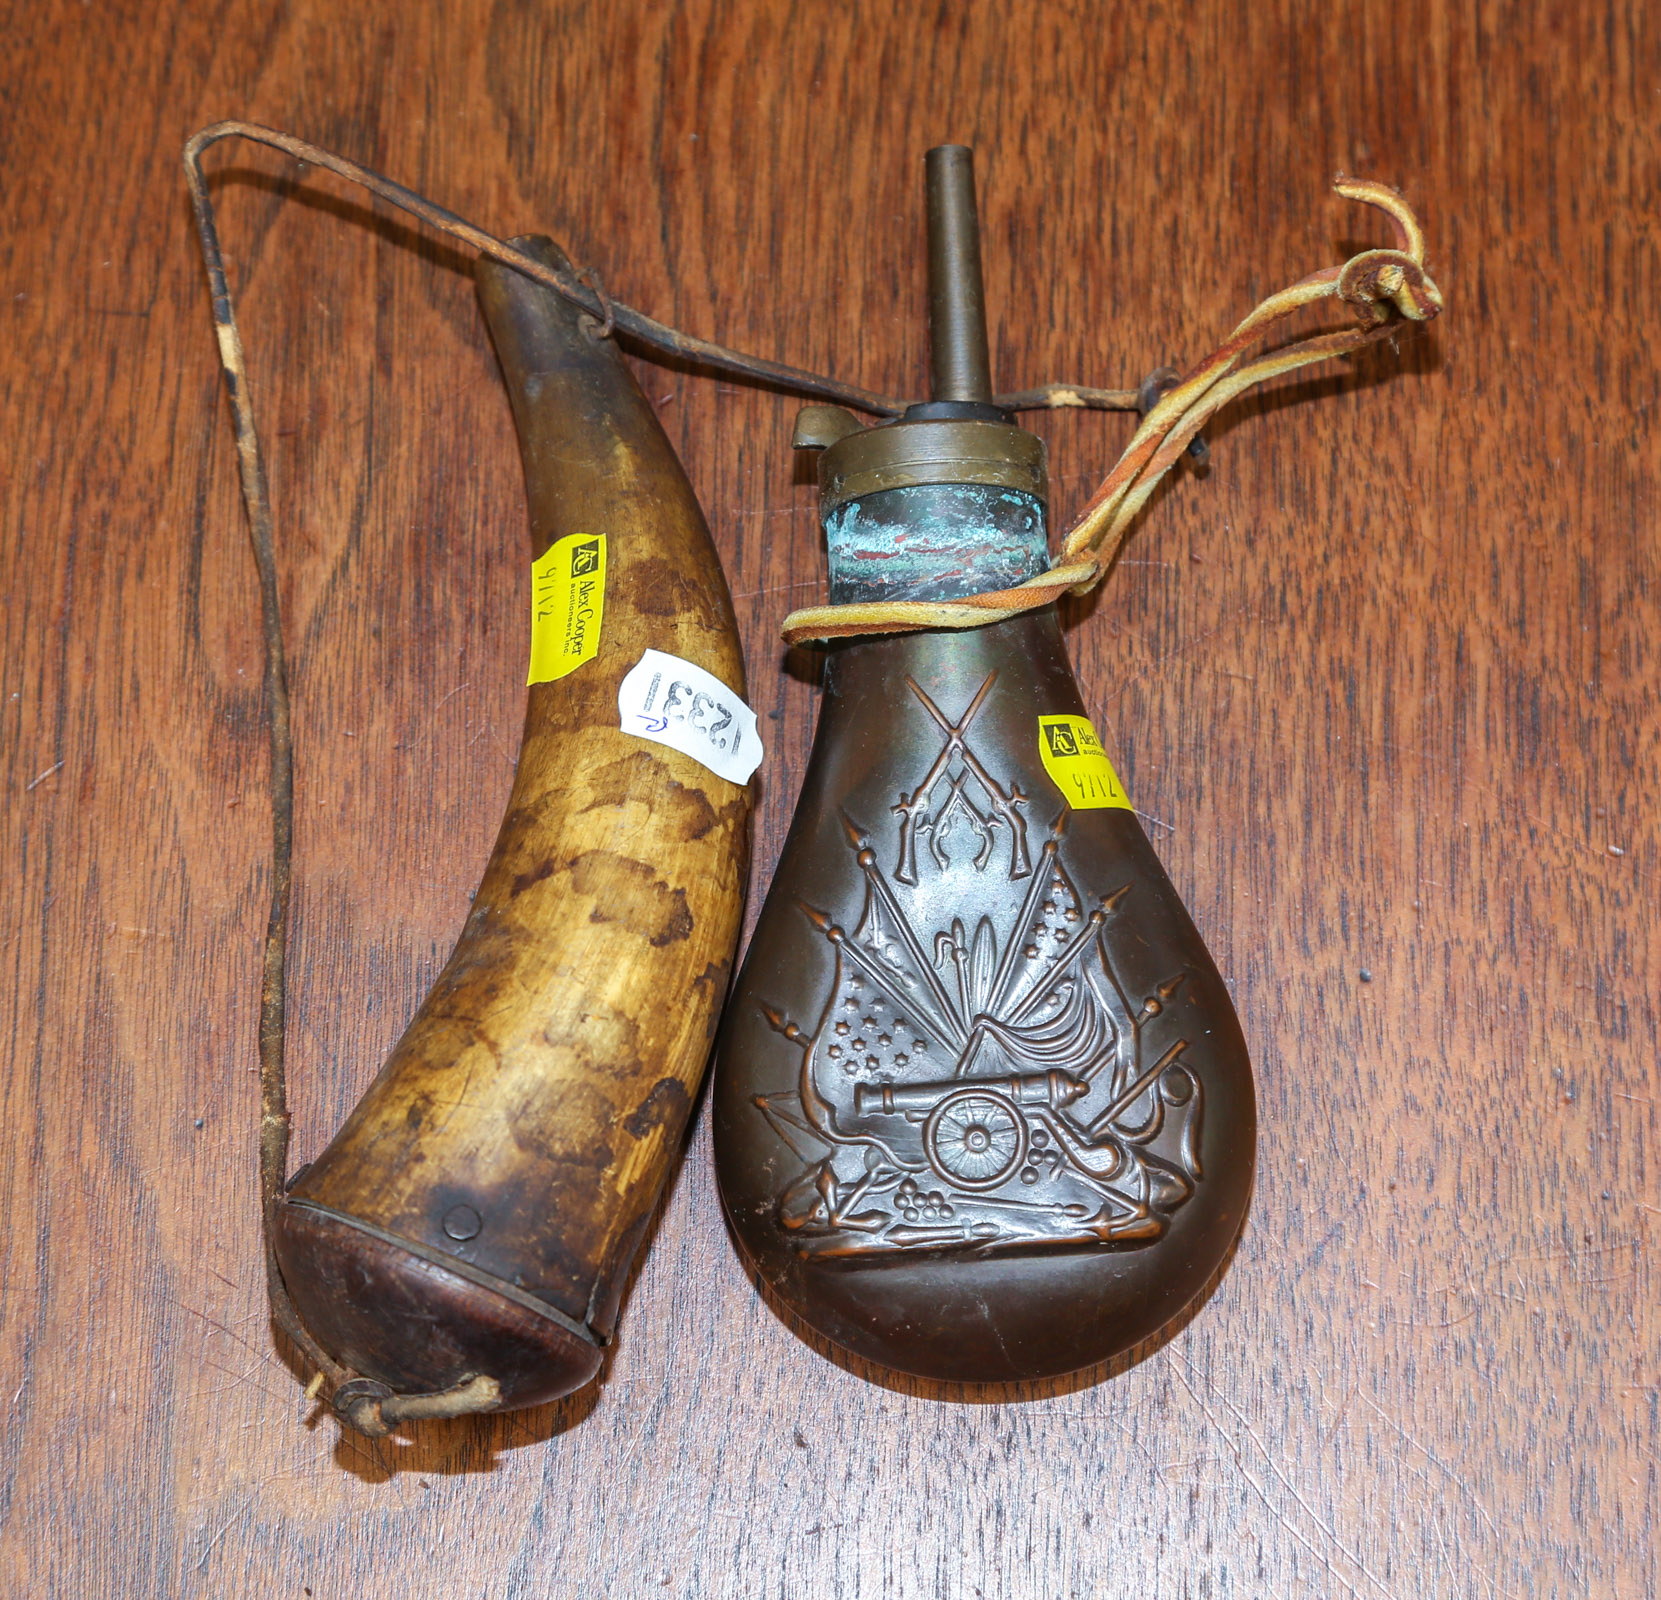 TWO ANTIQUE POWDER HORNS 19th century;